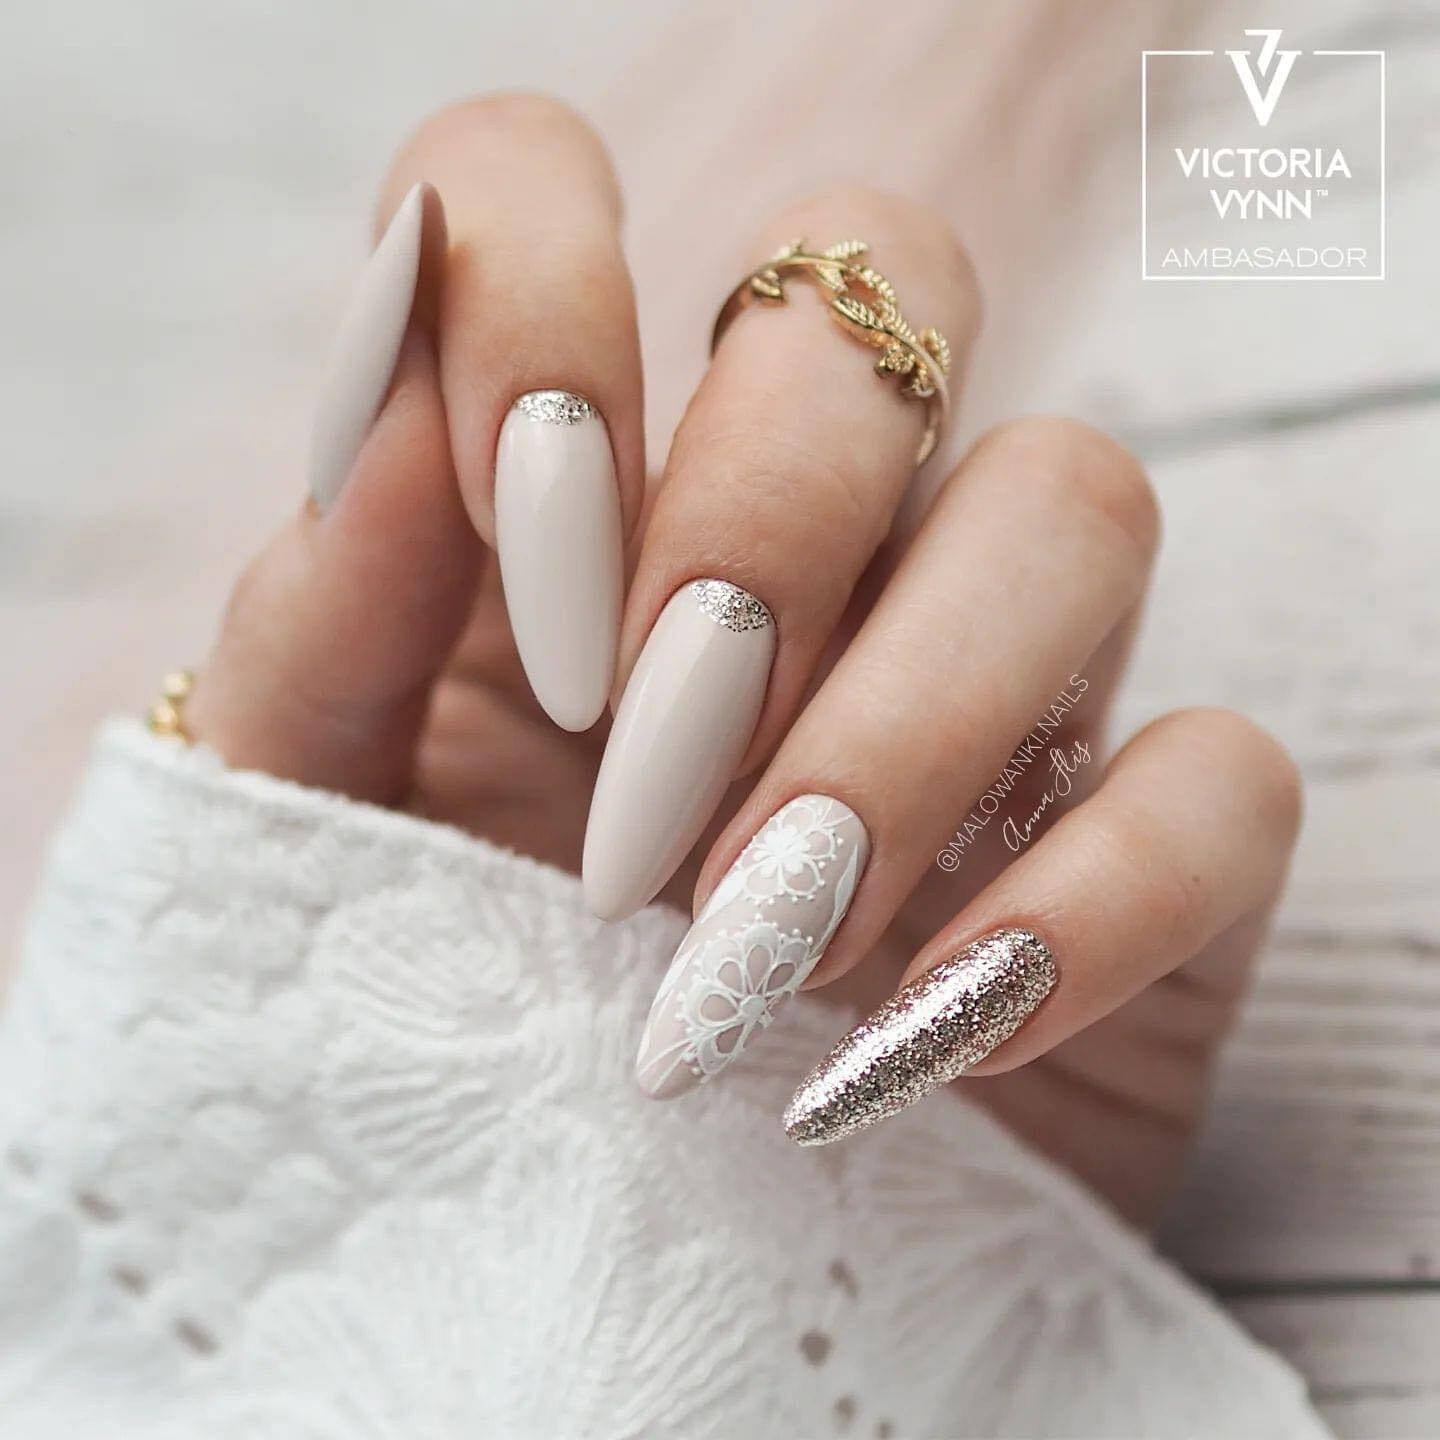 Festive Beige Nails With Silver Glitter